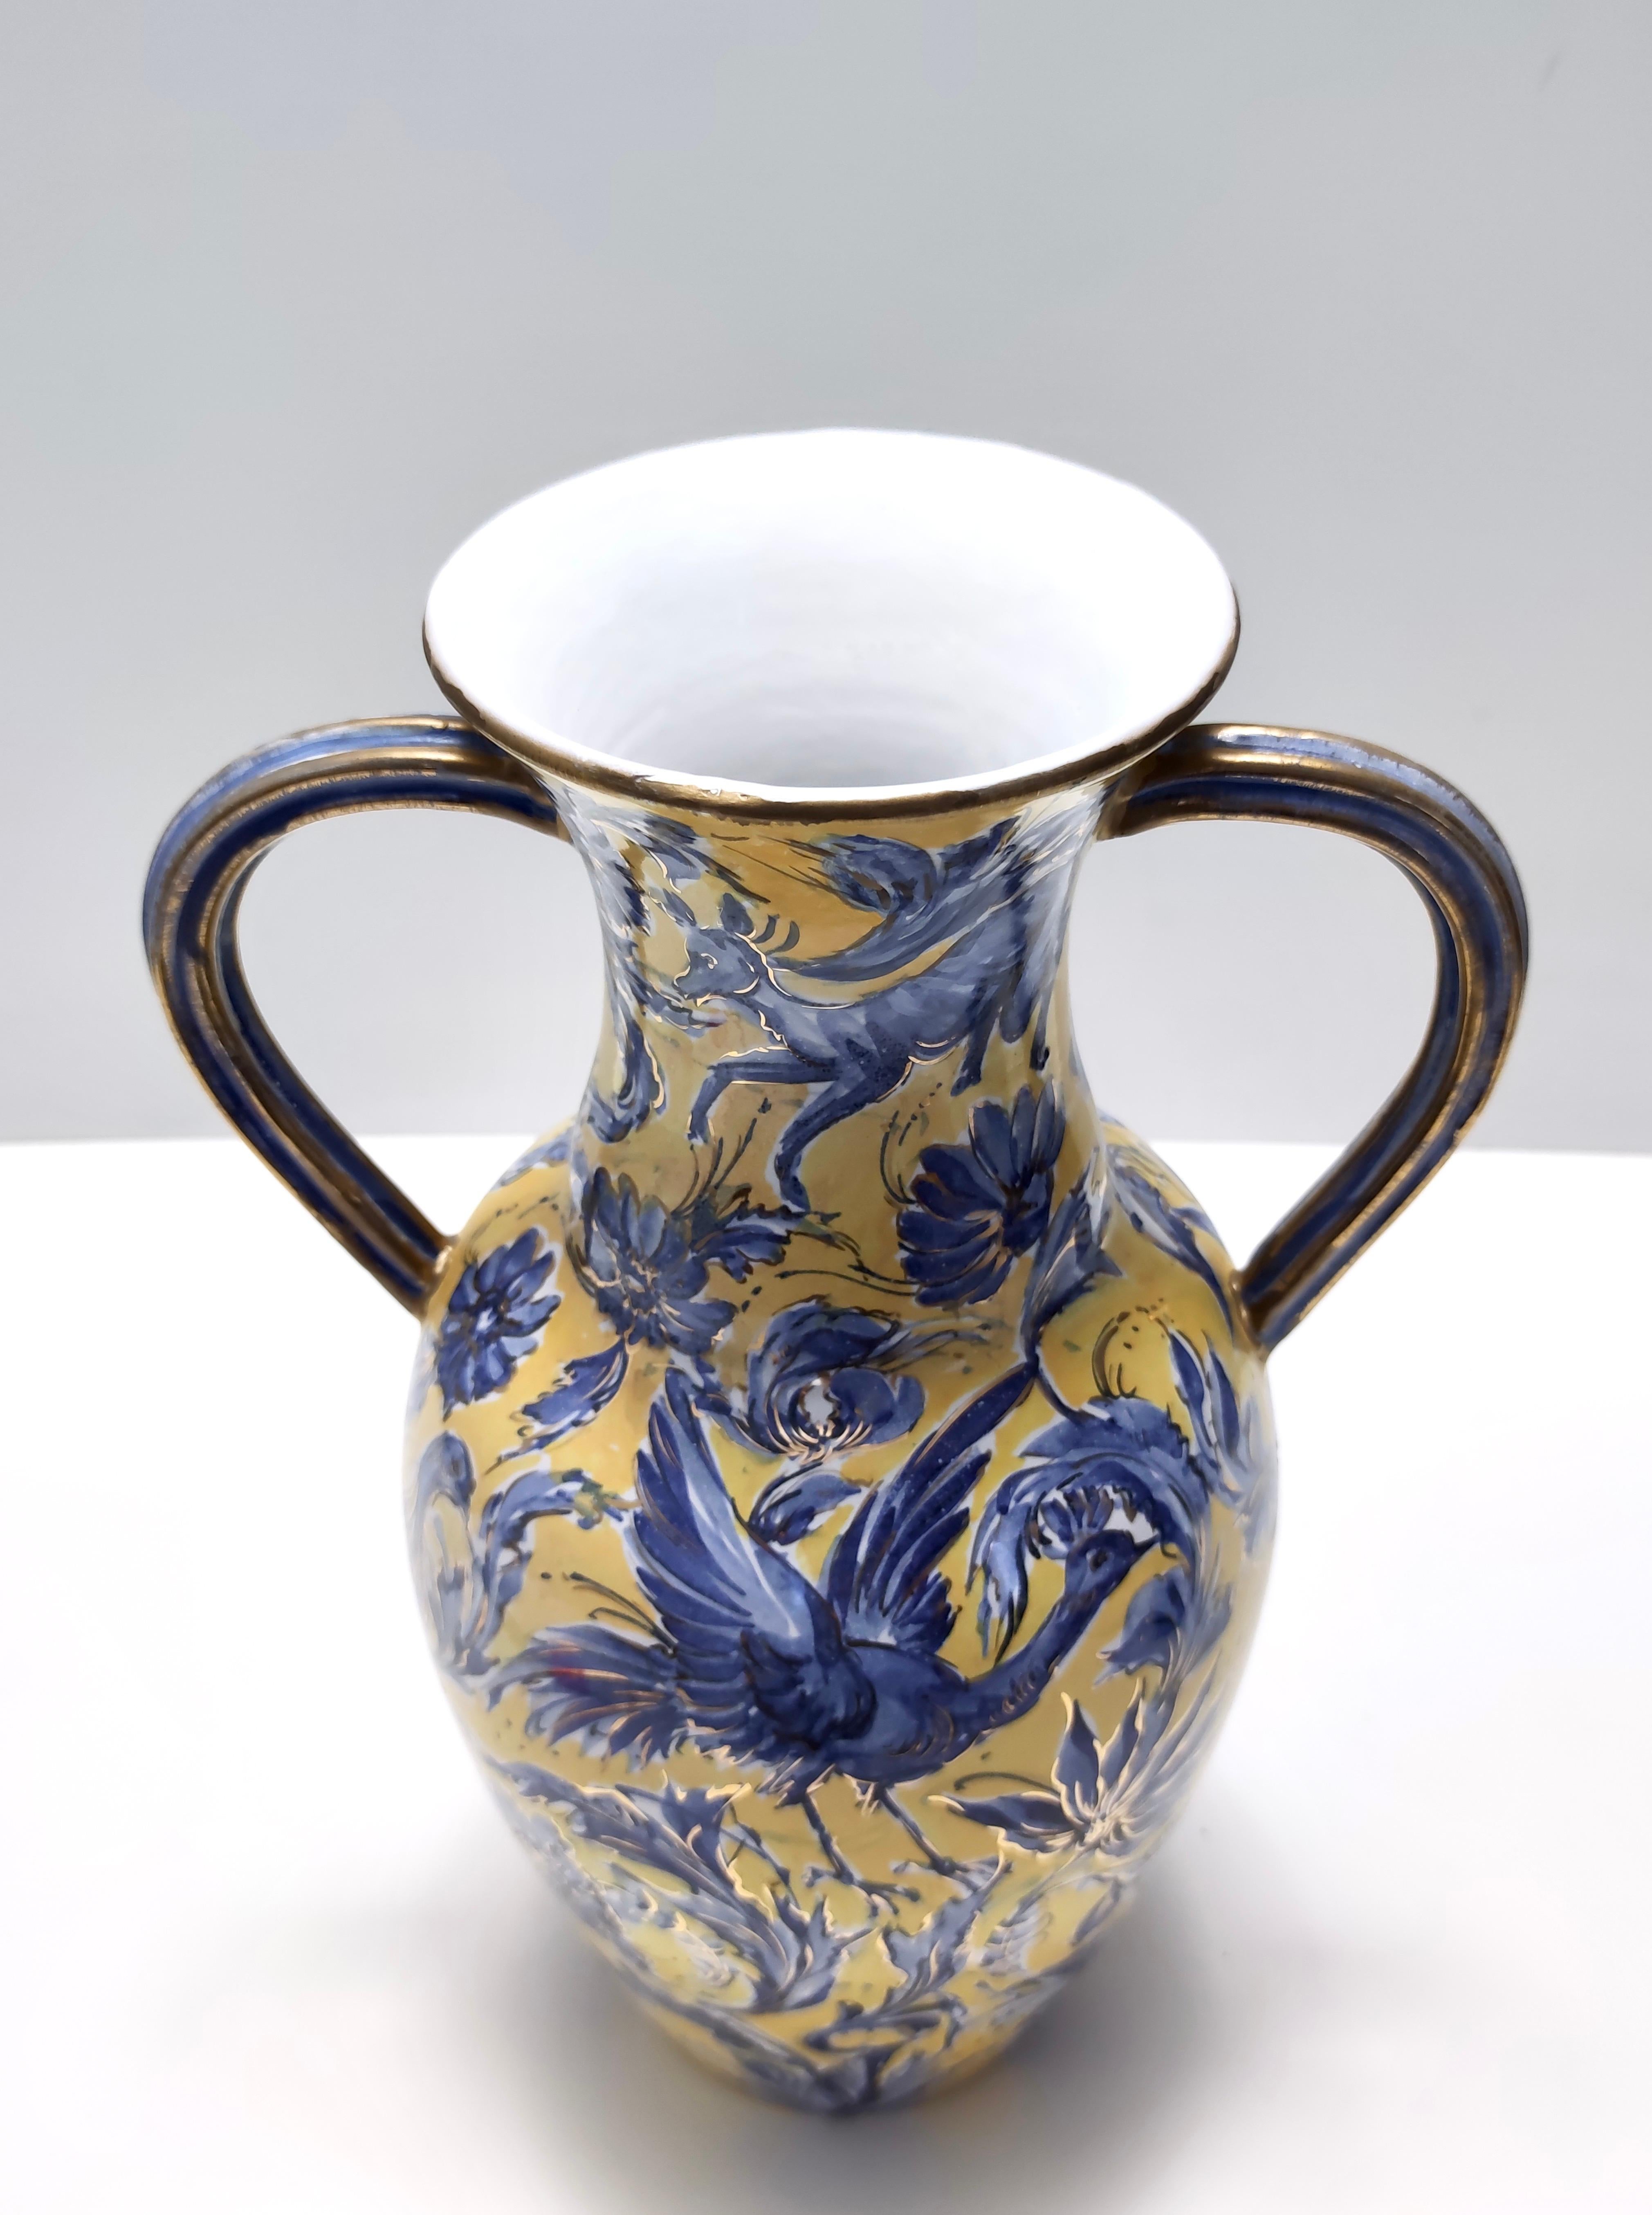 Handmade Yellow and Blue Glazed Ceramic Amphora Vase by Zulimo Aretini, Italy In Good Condition For Sale In Bresso, Lombardy